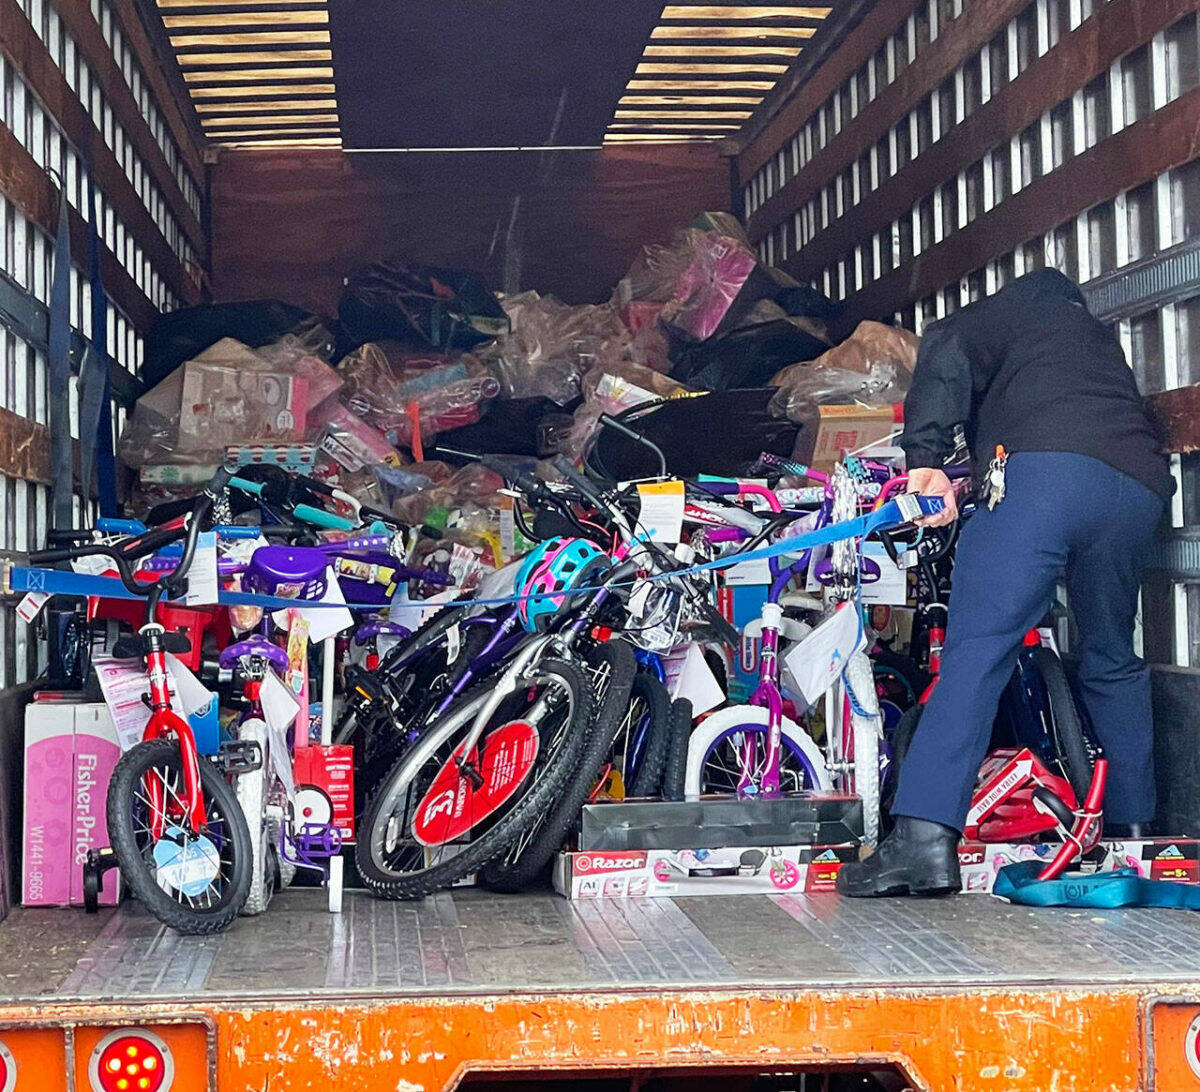 Crews drop off gifts collected in 2021 for the Puget Sound Fire Toys for Joy program. COURTESY FILE PHOTO, Puget Sound Fire